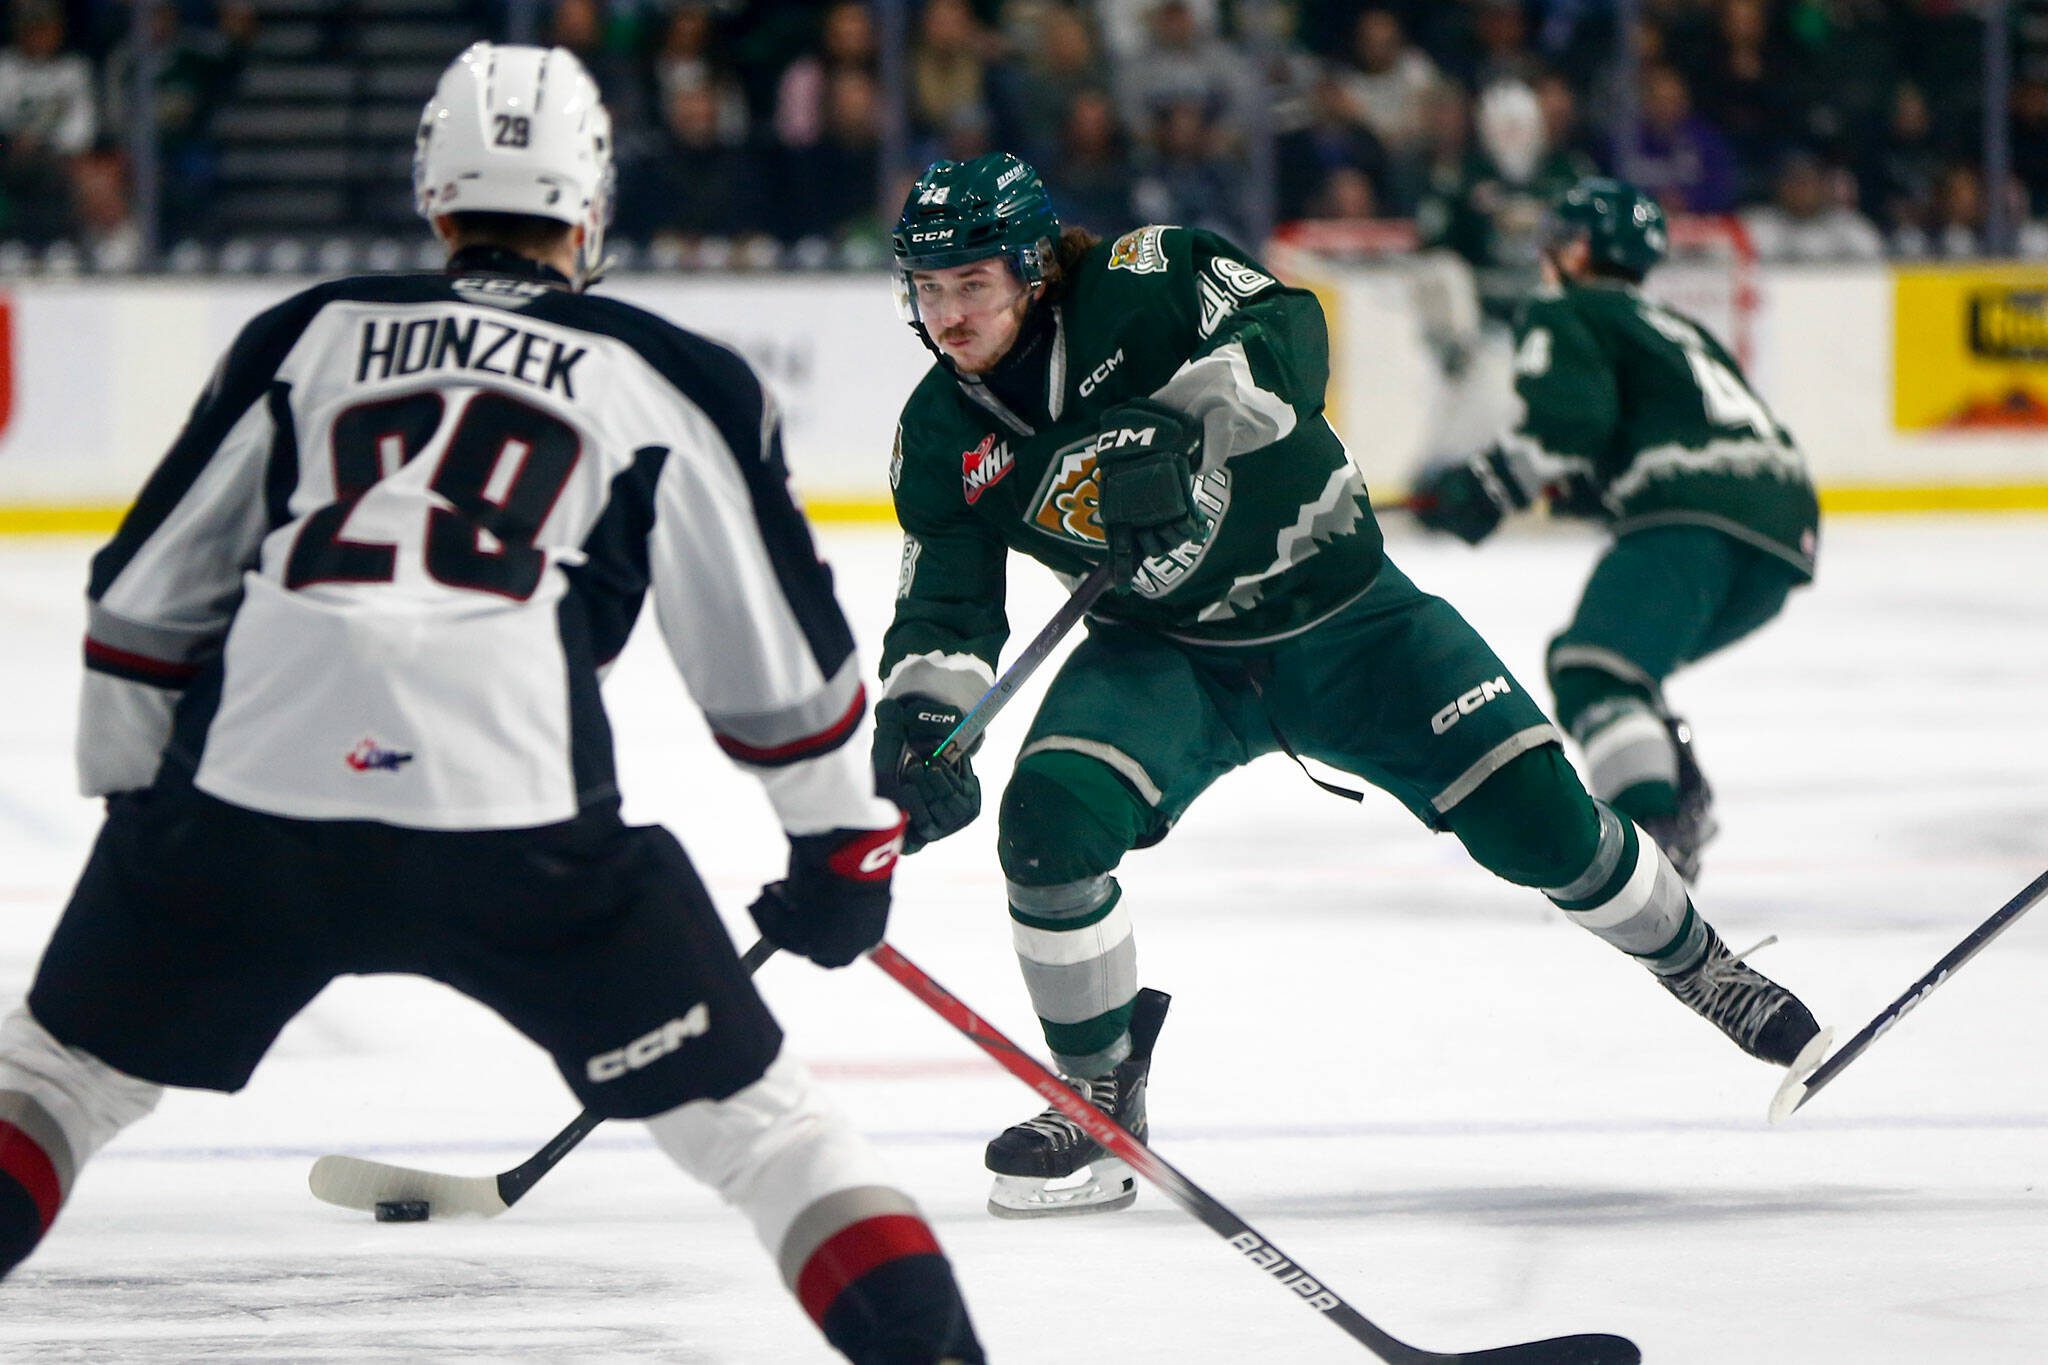 Everett Silvertips forward Caden Brown tries to get the puck to the net against the Vancouver Giants during Game 1 of their playoff series on March 29 at Angel of the Winds Arena in Everrett. (Ryan Berry / The Herald)